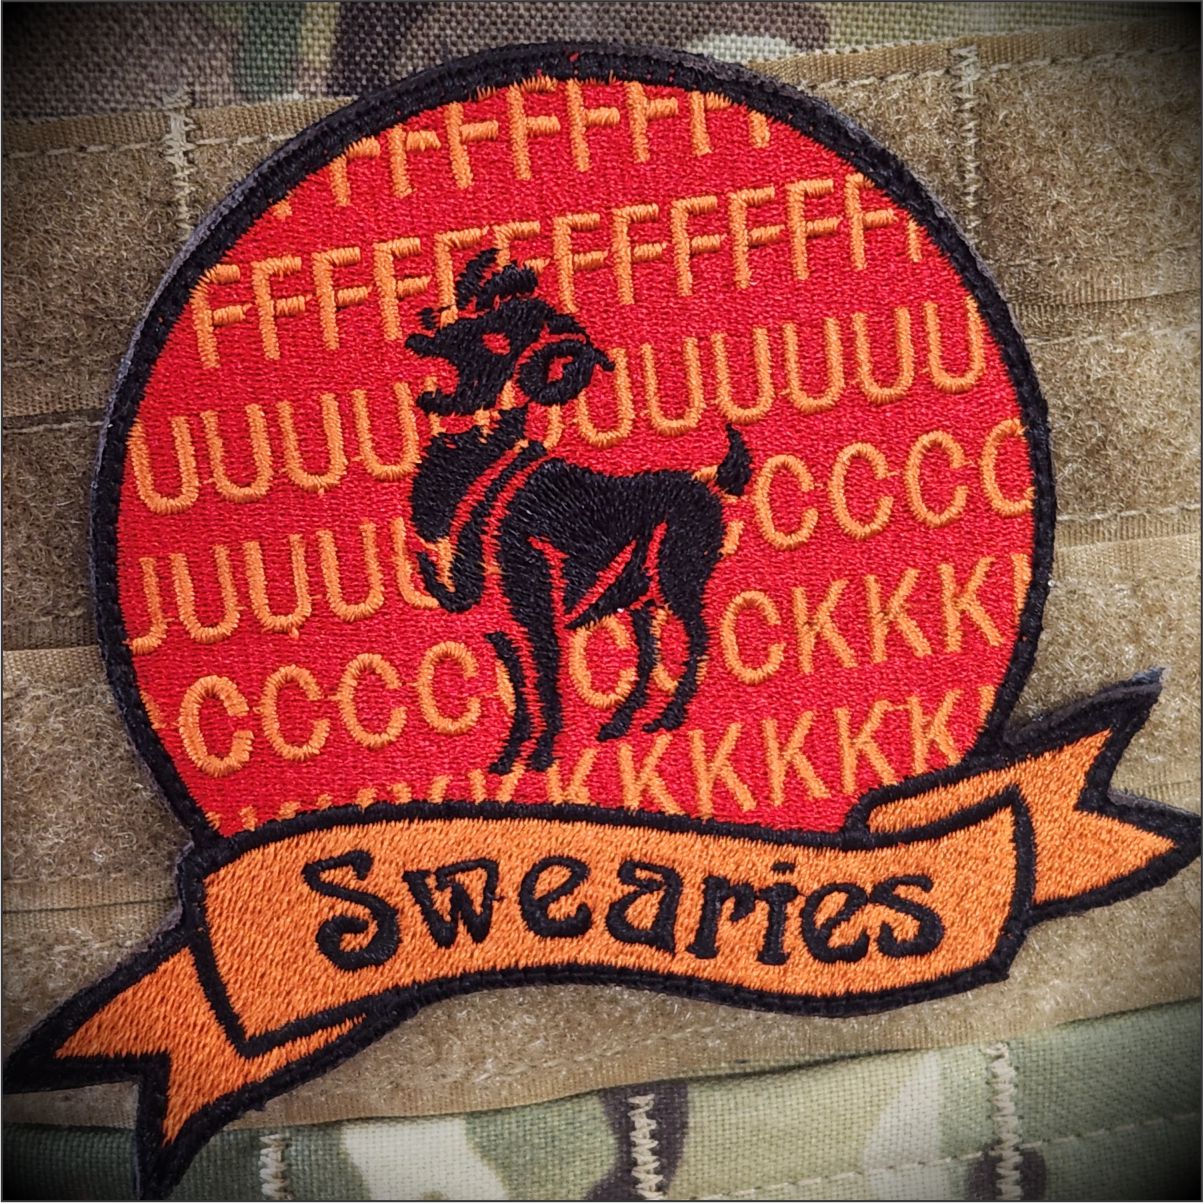 'Swearies' - Aries - 4.5" Patch Astrological Funny Parody Patch Ram